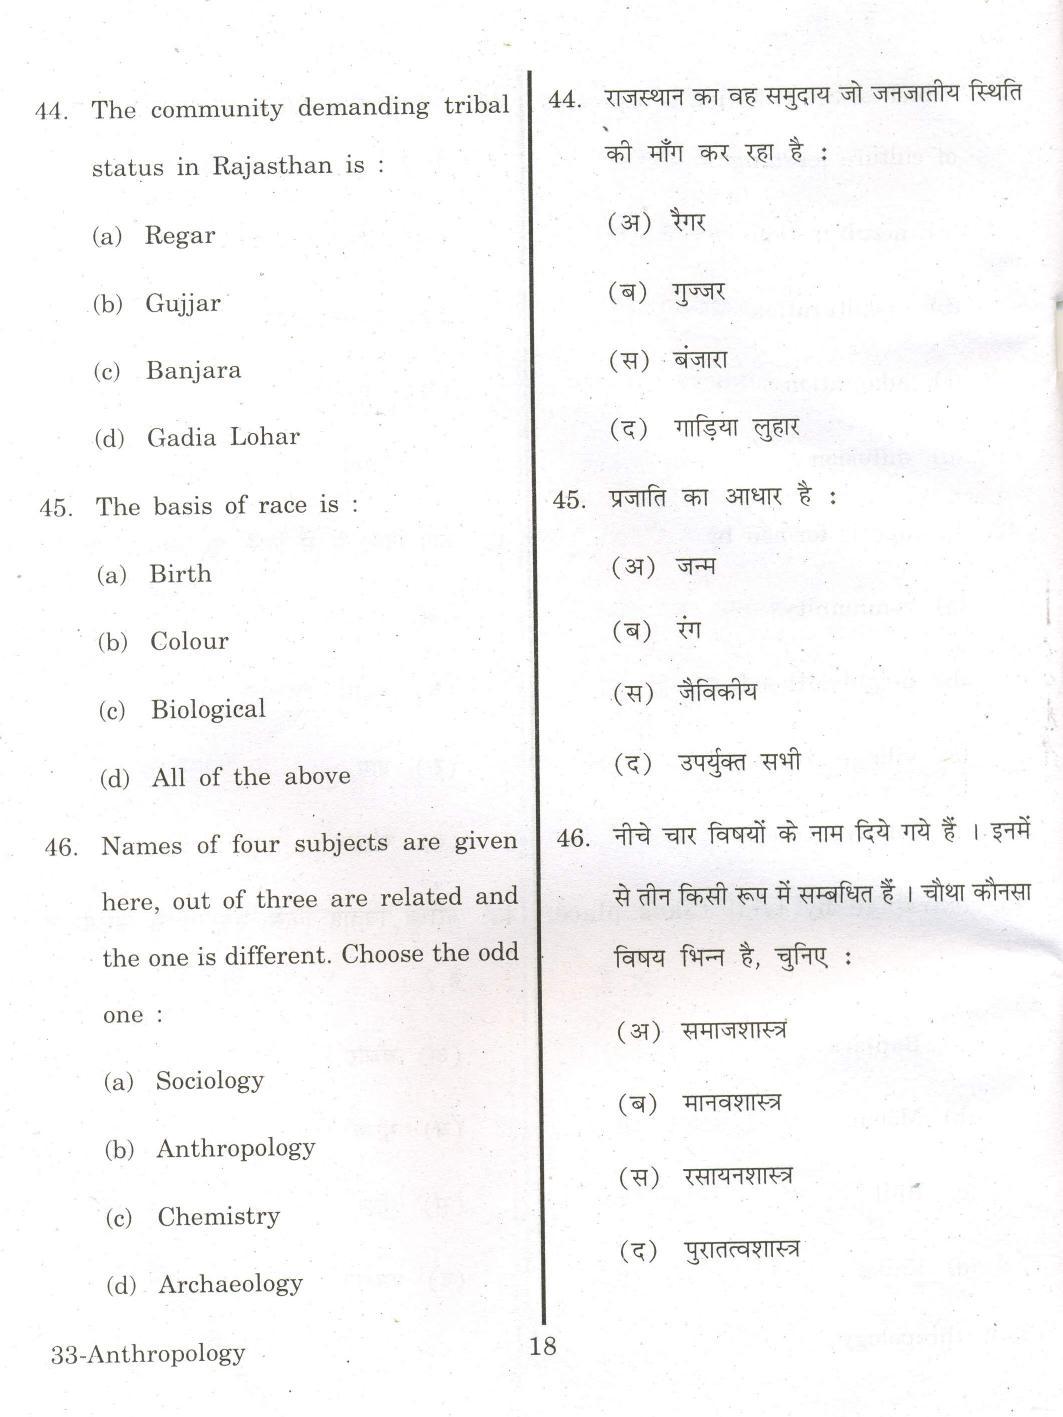 URATPG Anthropology 2013 Question Paper - Page 17